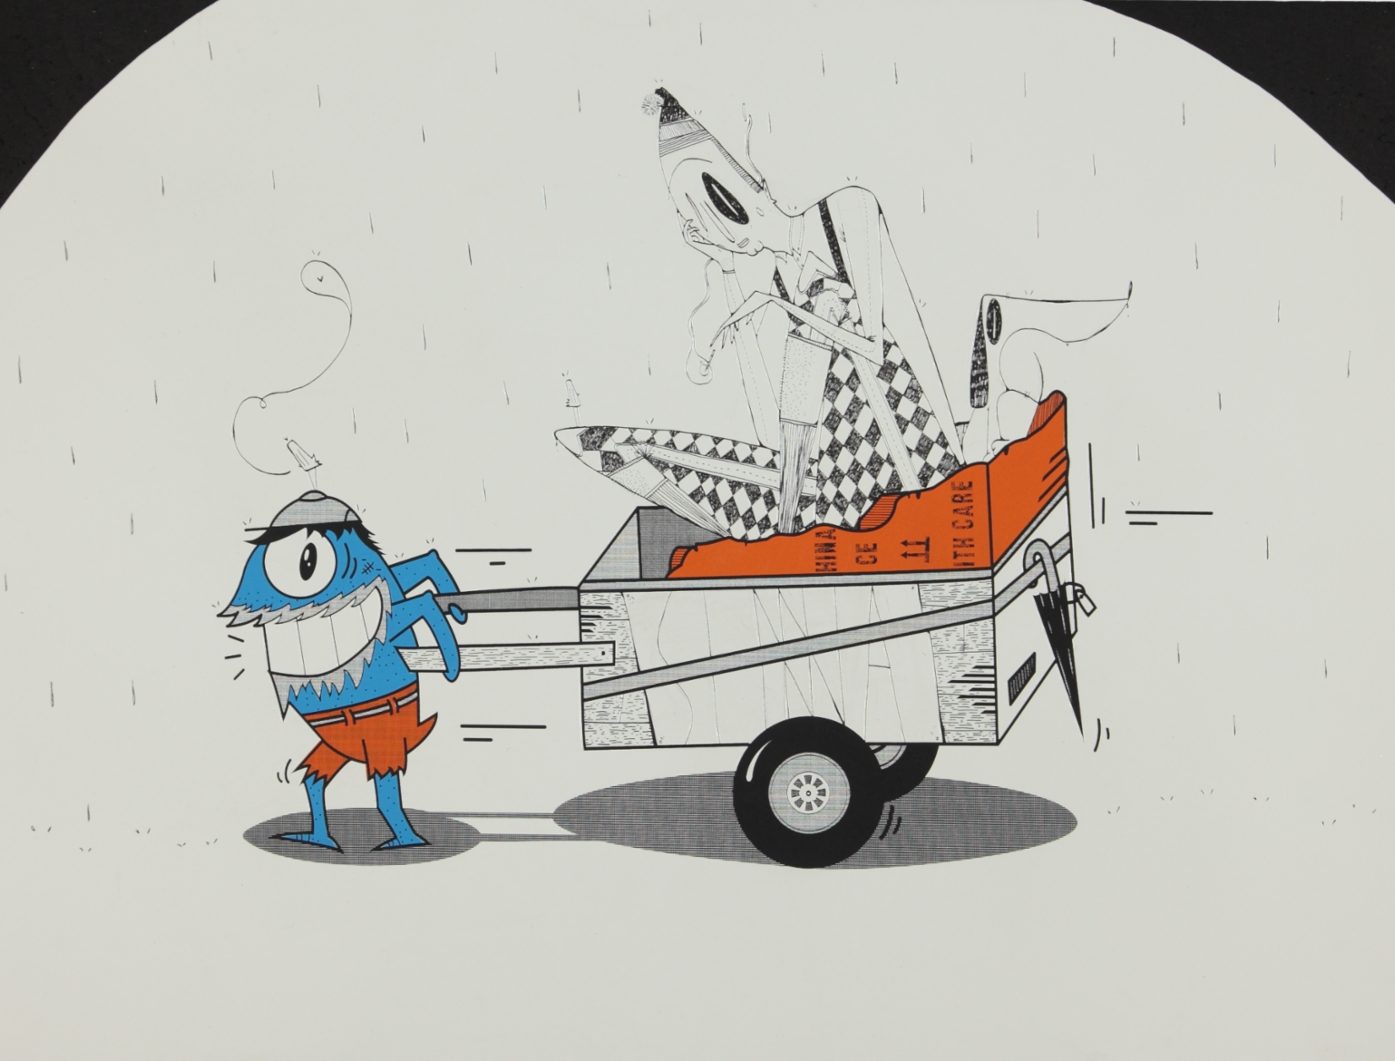 Streetlover by PEZ in collaboration with Alex Senna